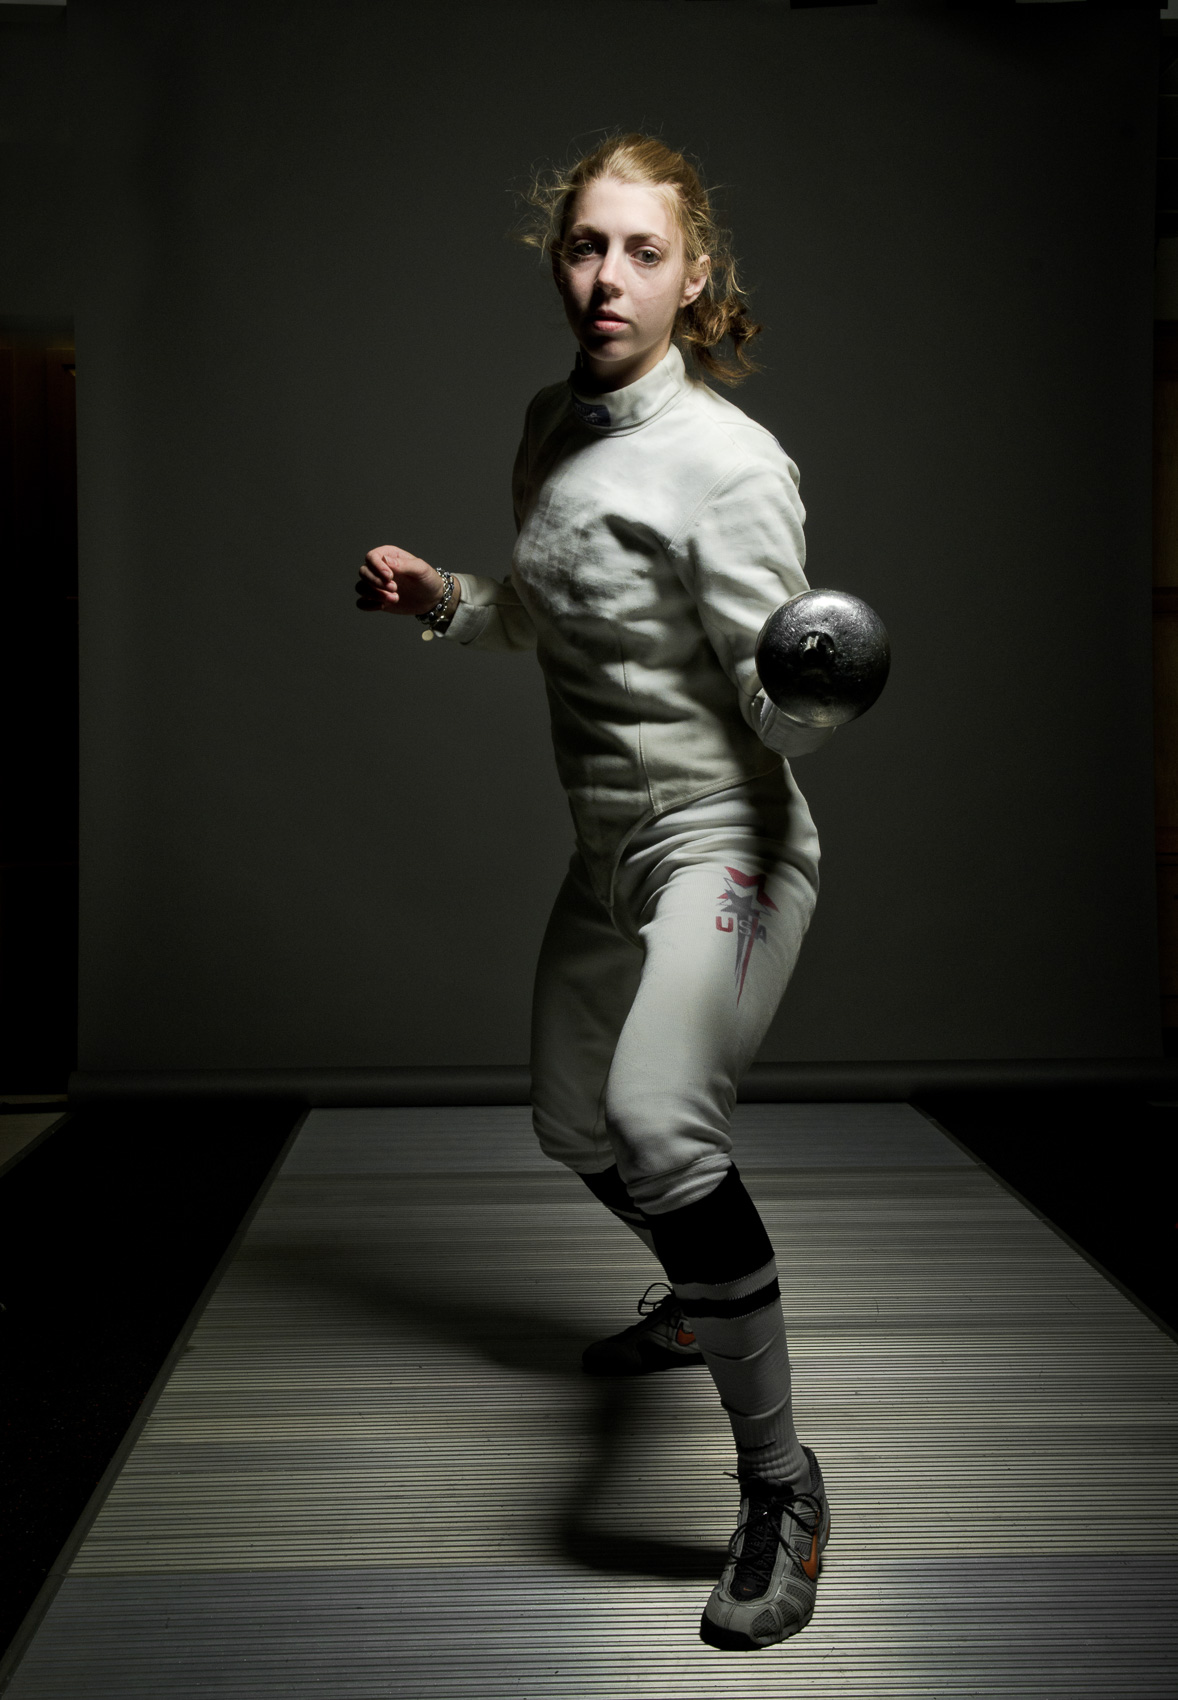 Susie Scanlan / Olympic Fencer